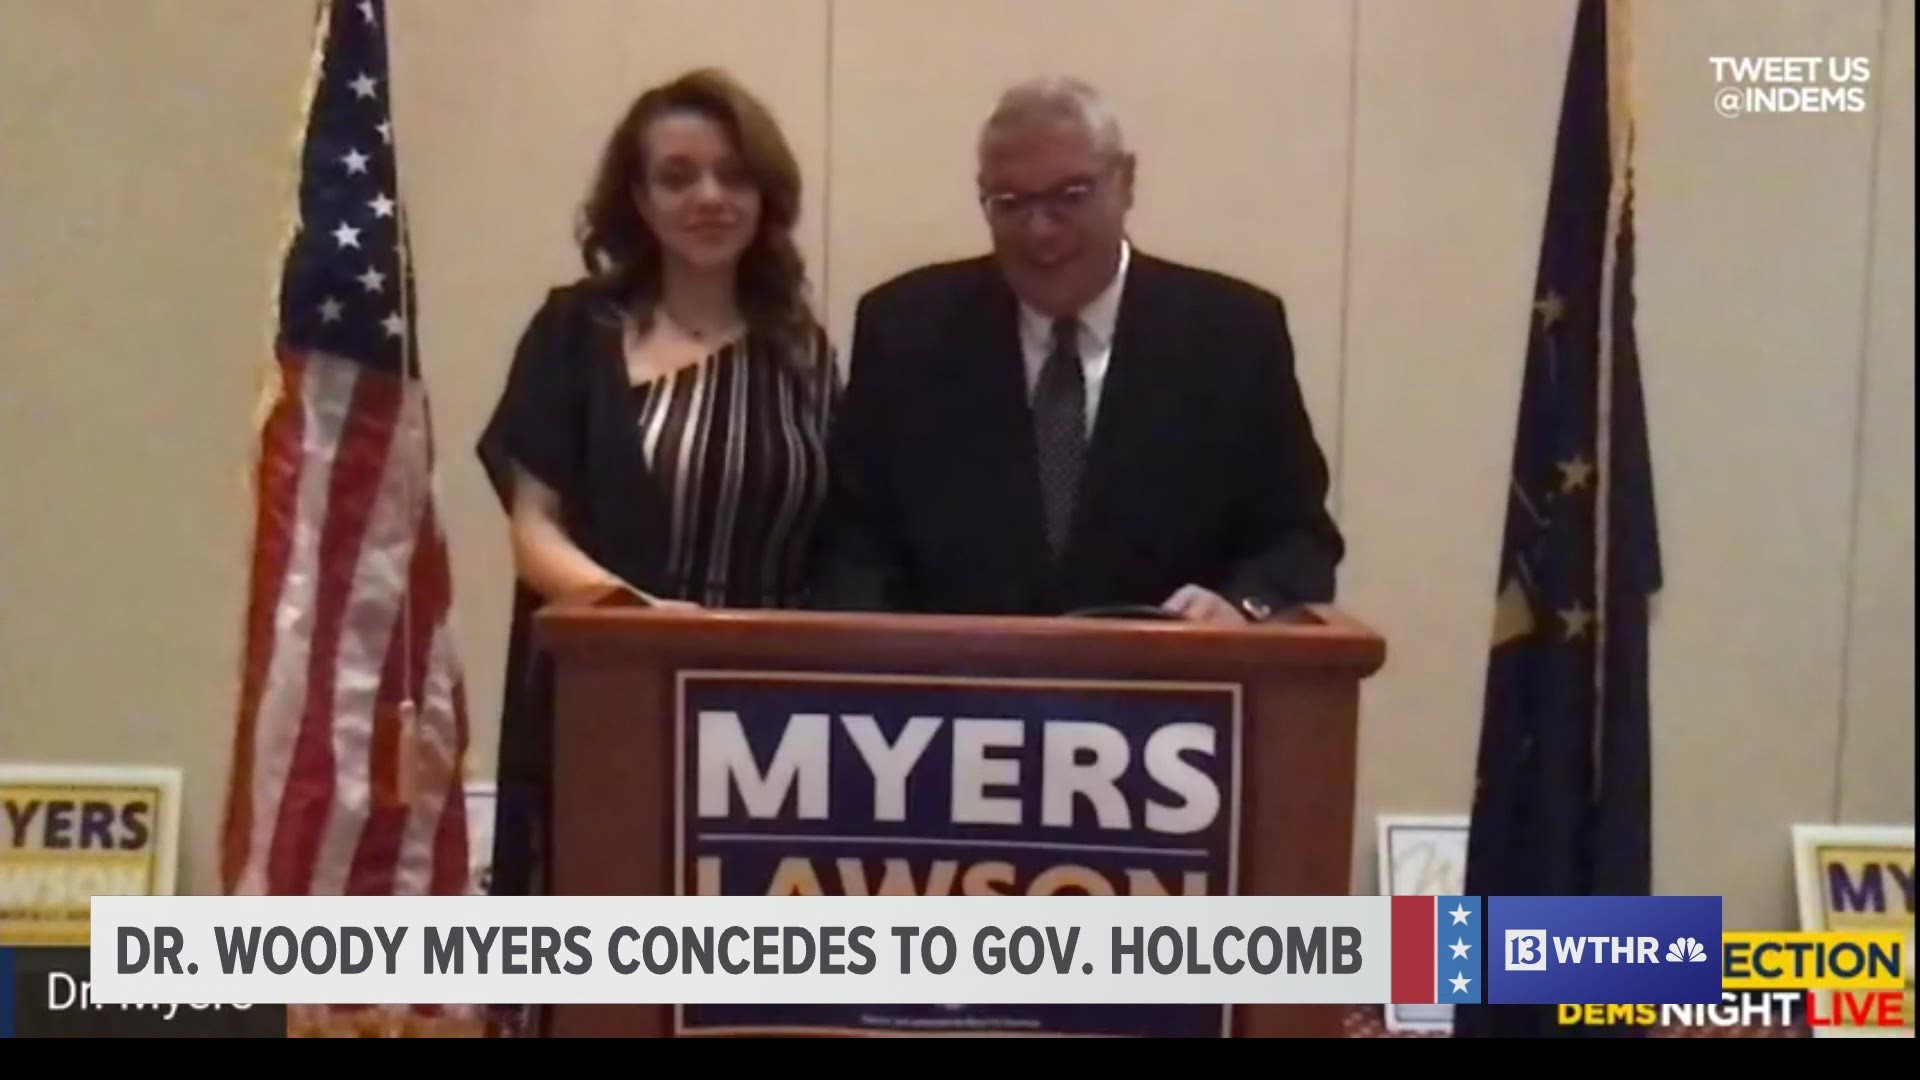 Dr. Myers spoke on a Democrat live feed on Tuesday evening.